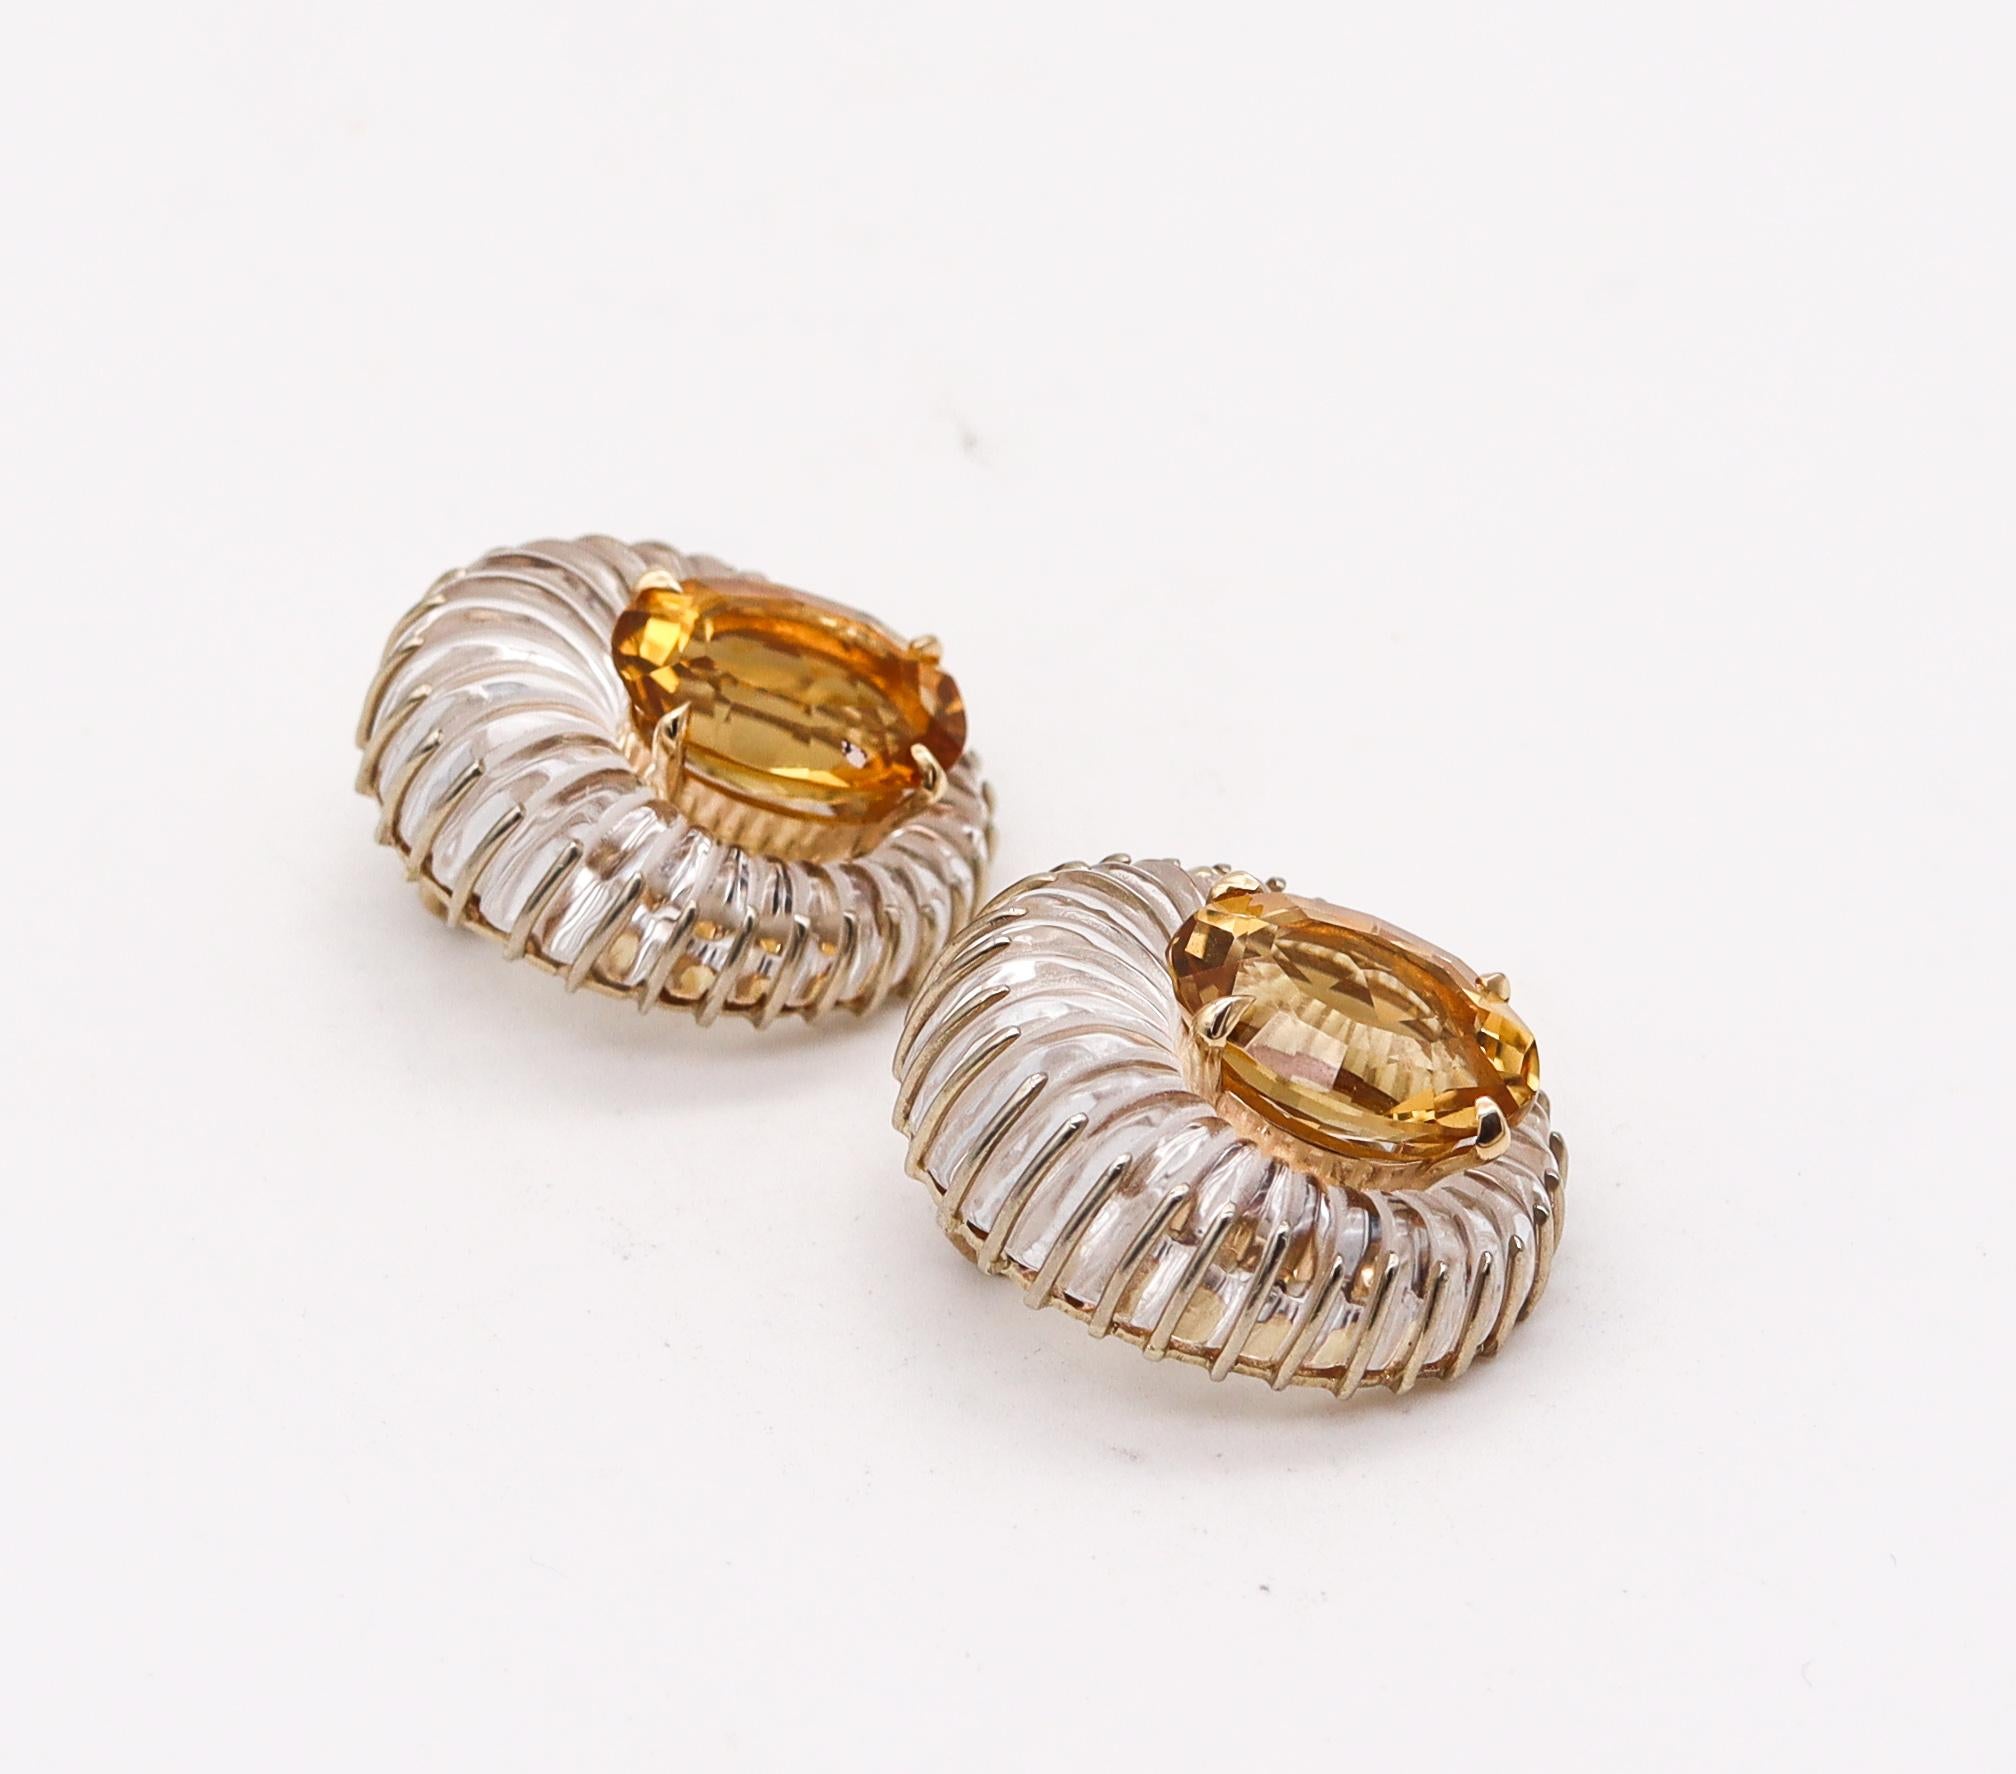 Modernist Seaman Schepps 1970 Fluted Rock Quartz Earrings 14kt Gold with 79.32cts Citrine For Sale